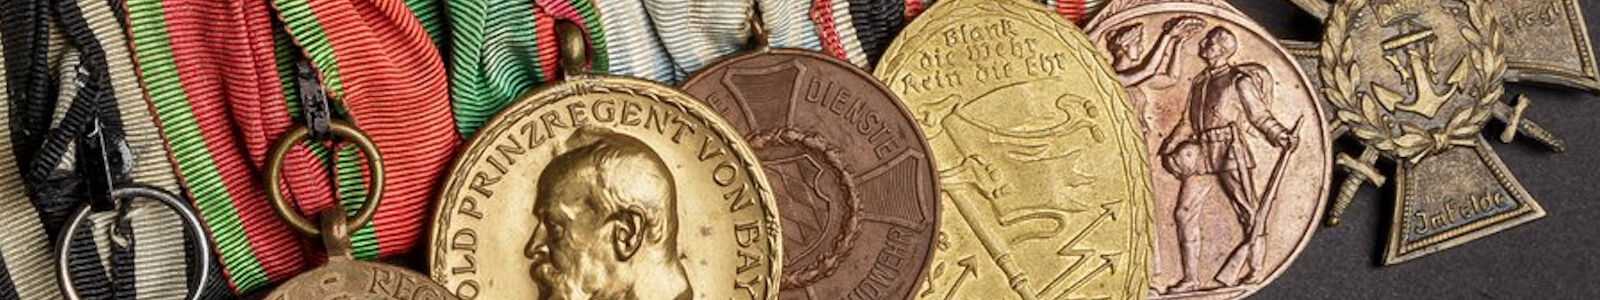 International medals & military historical collectibles